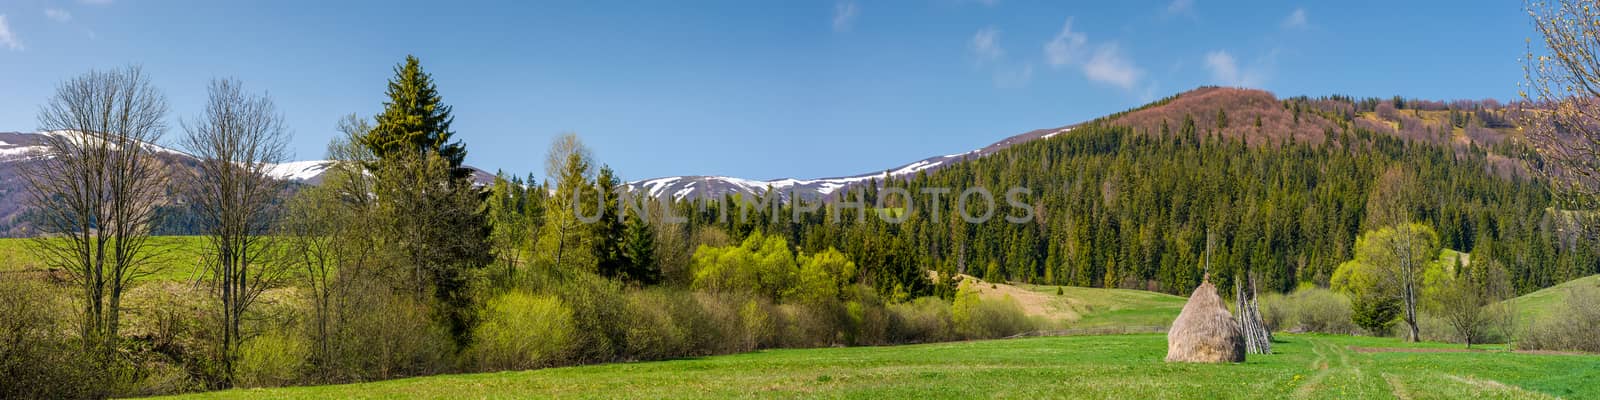 panorama of rural field in mountains by Pellinni